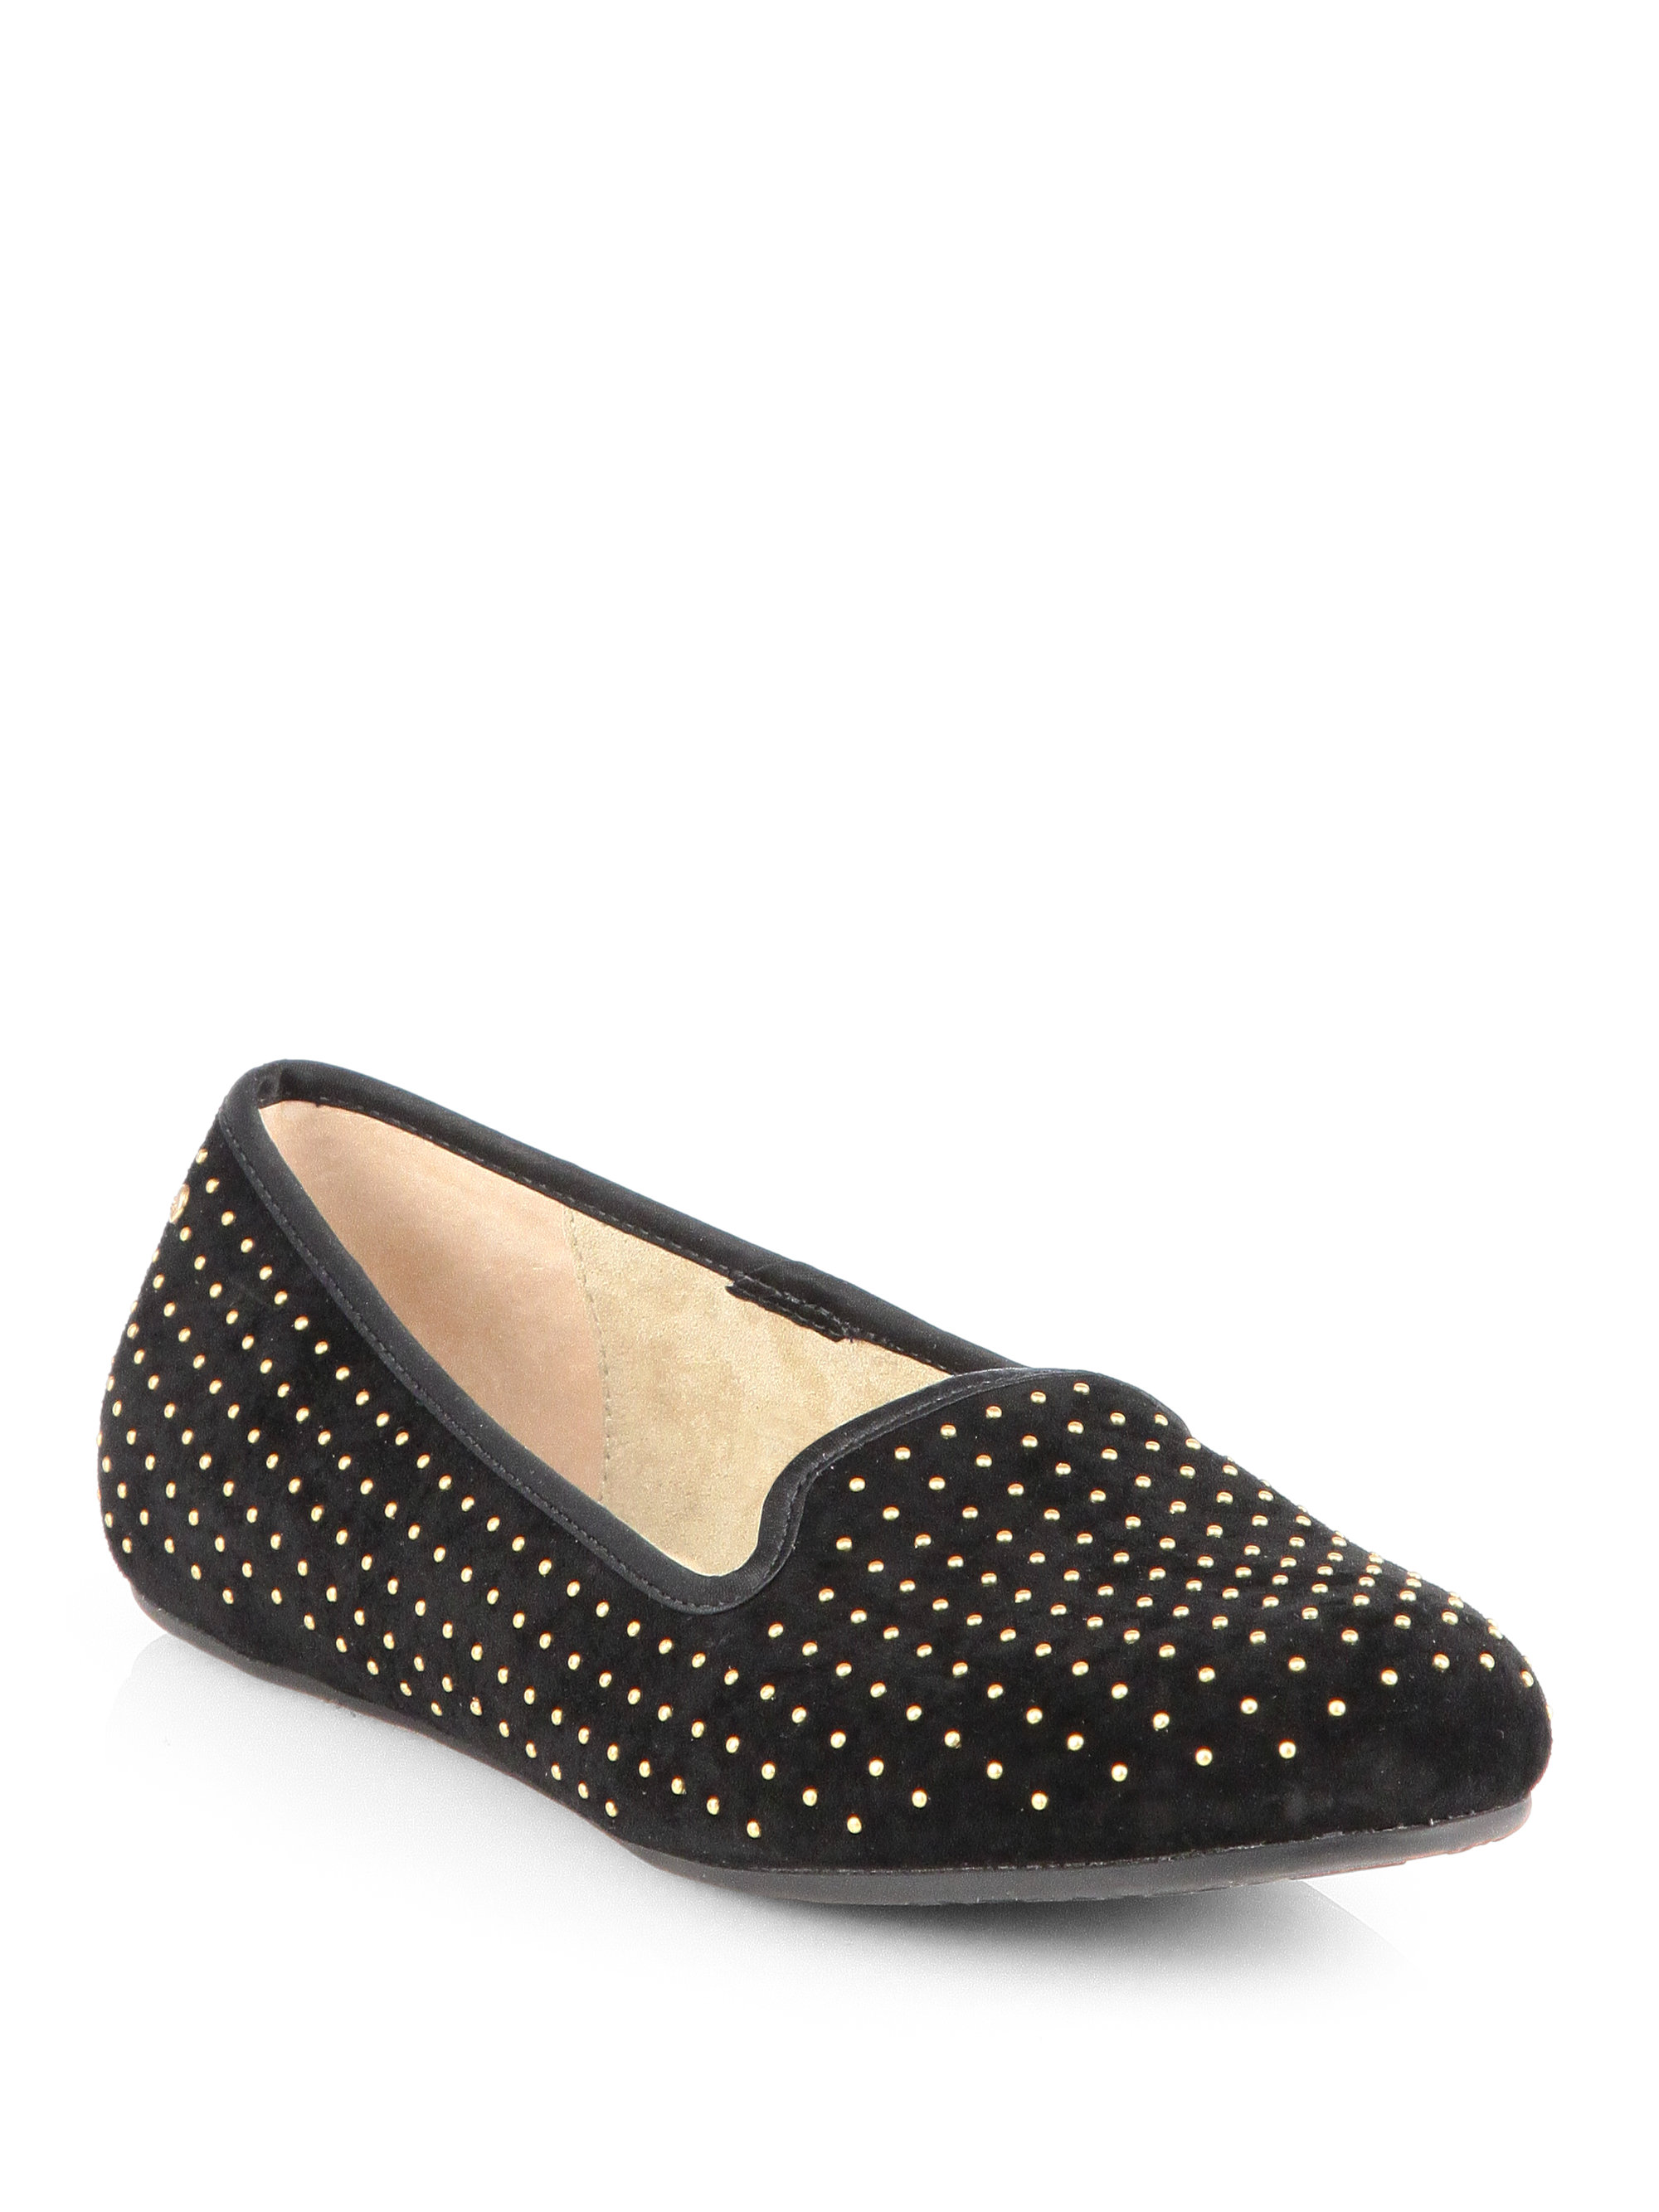 Ugg Alloway Studded Suede Smoking Slippers in Black | Lyst